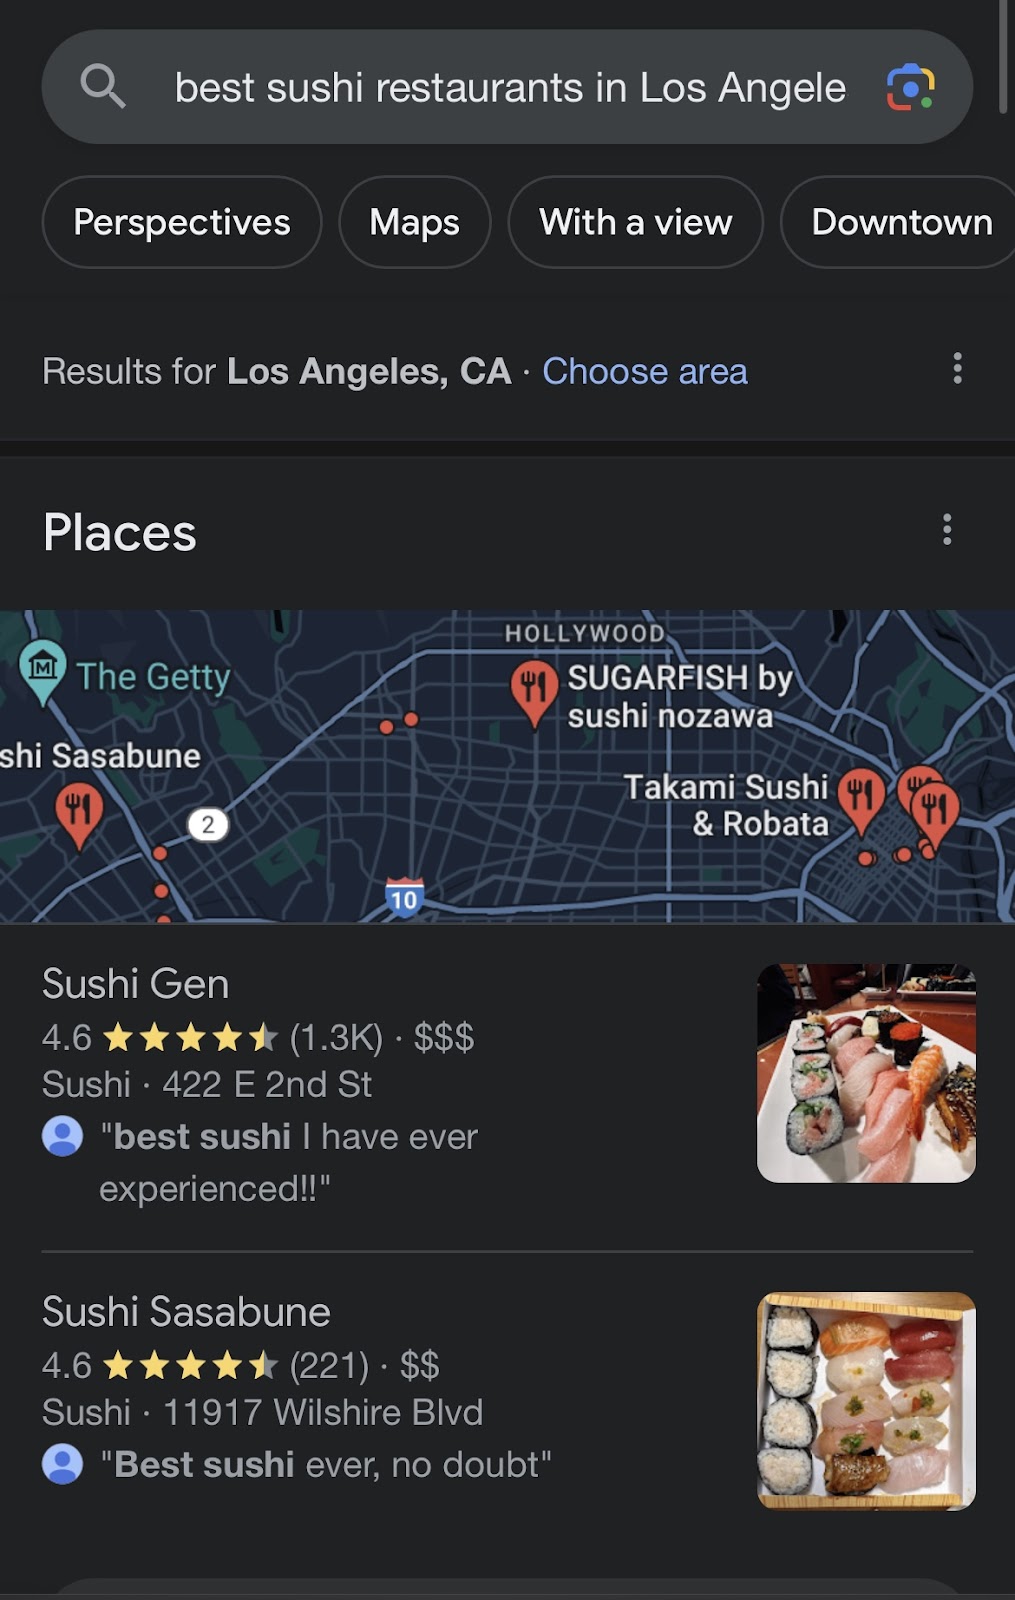 Standard Google mobile search results for sushi restaurants in Los Angeles